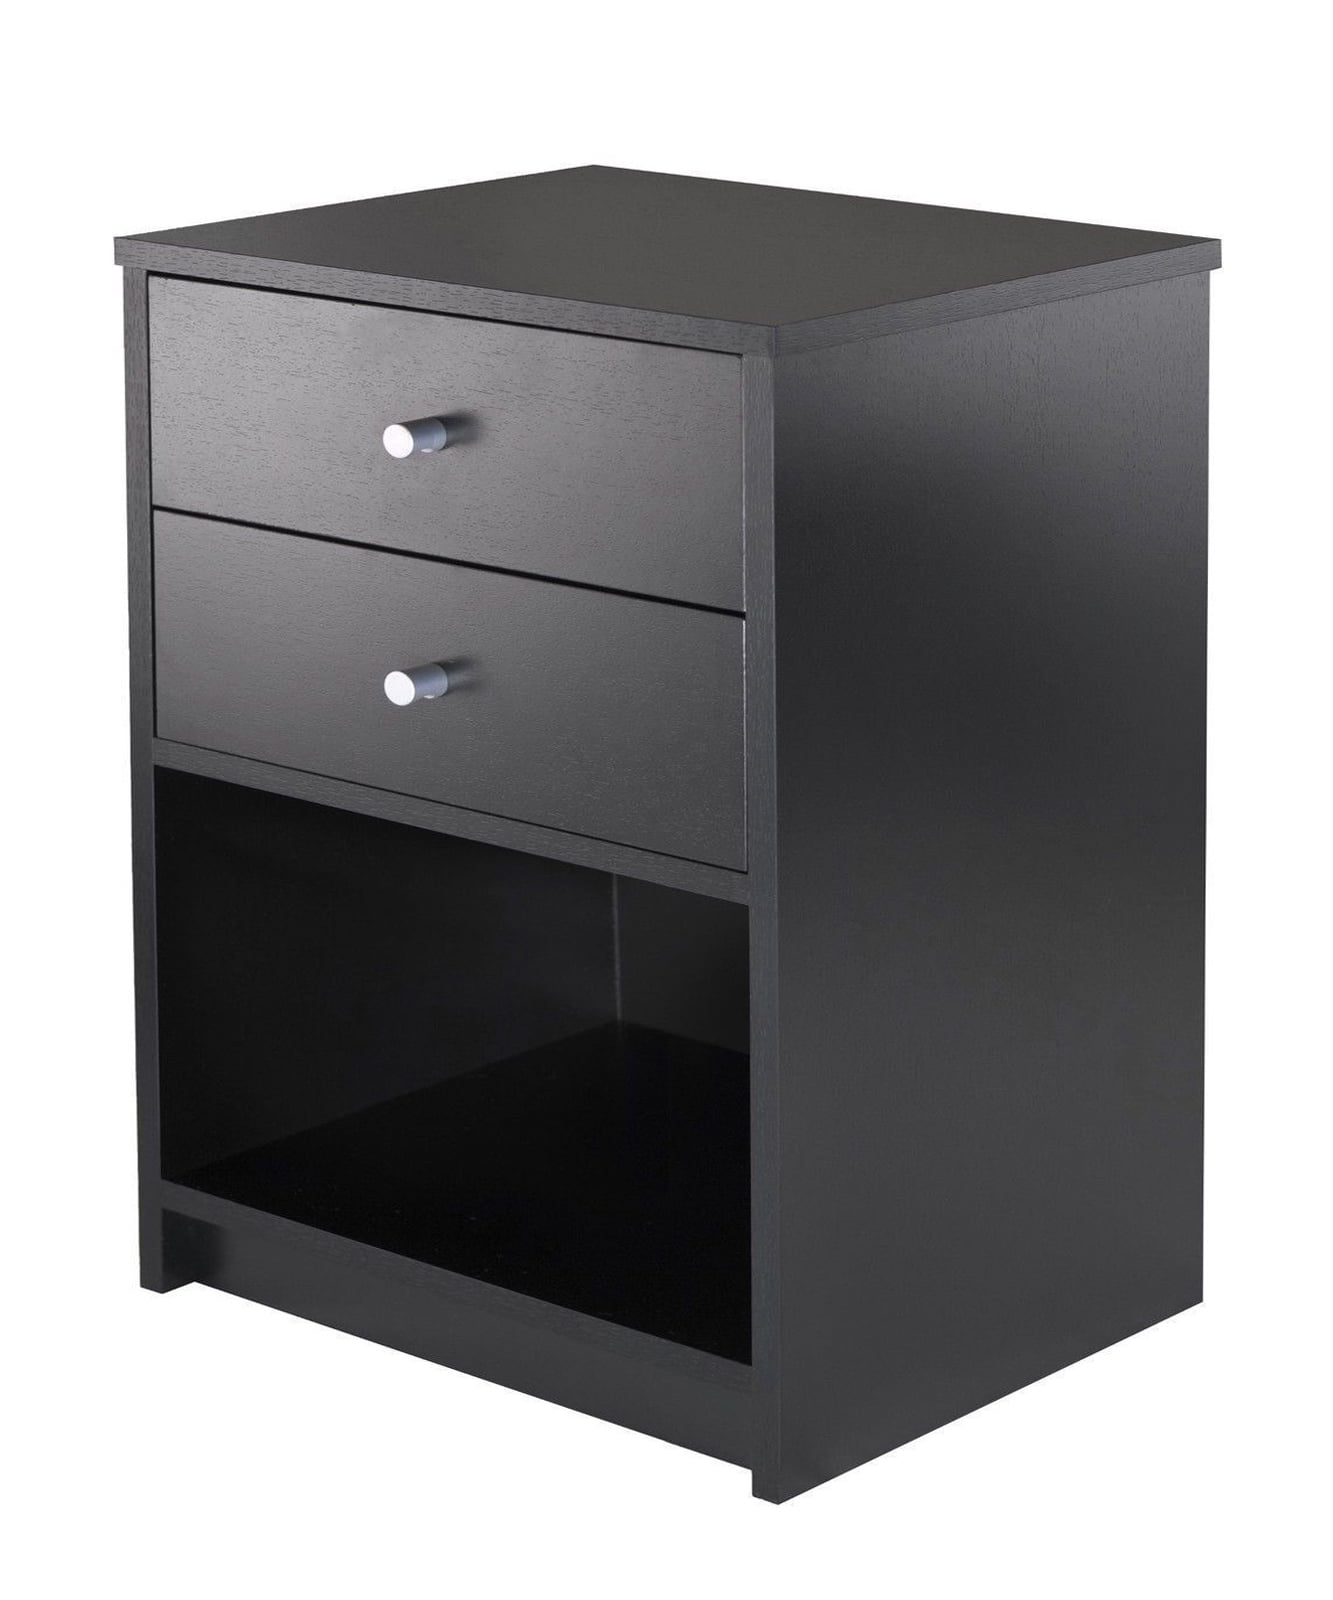 HUGO Small Drawer Nightstand - Black Solid European Birch, Fully Assembled,  Floor Standing or Wall Mounted, Environment-Friendly Black Oil Finish -  Woodek Design